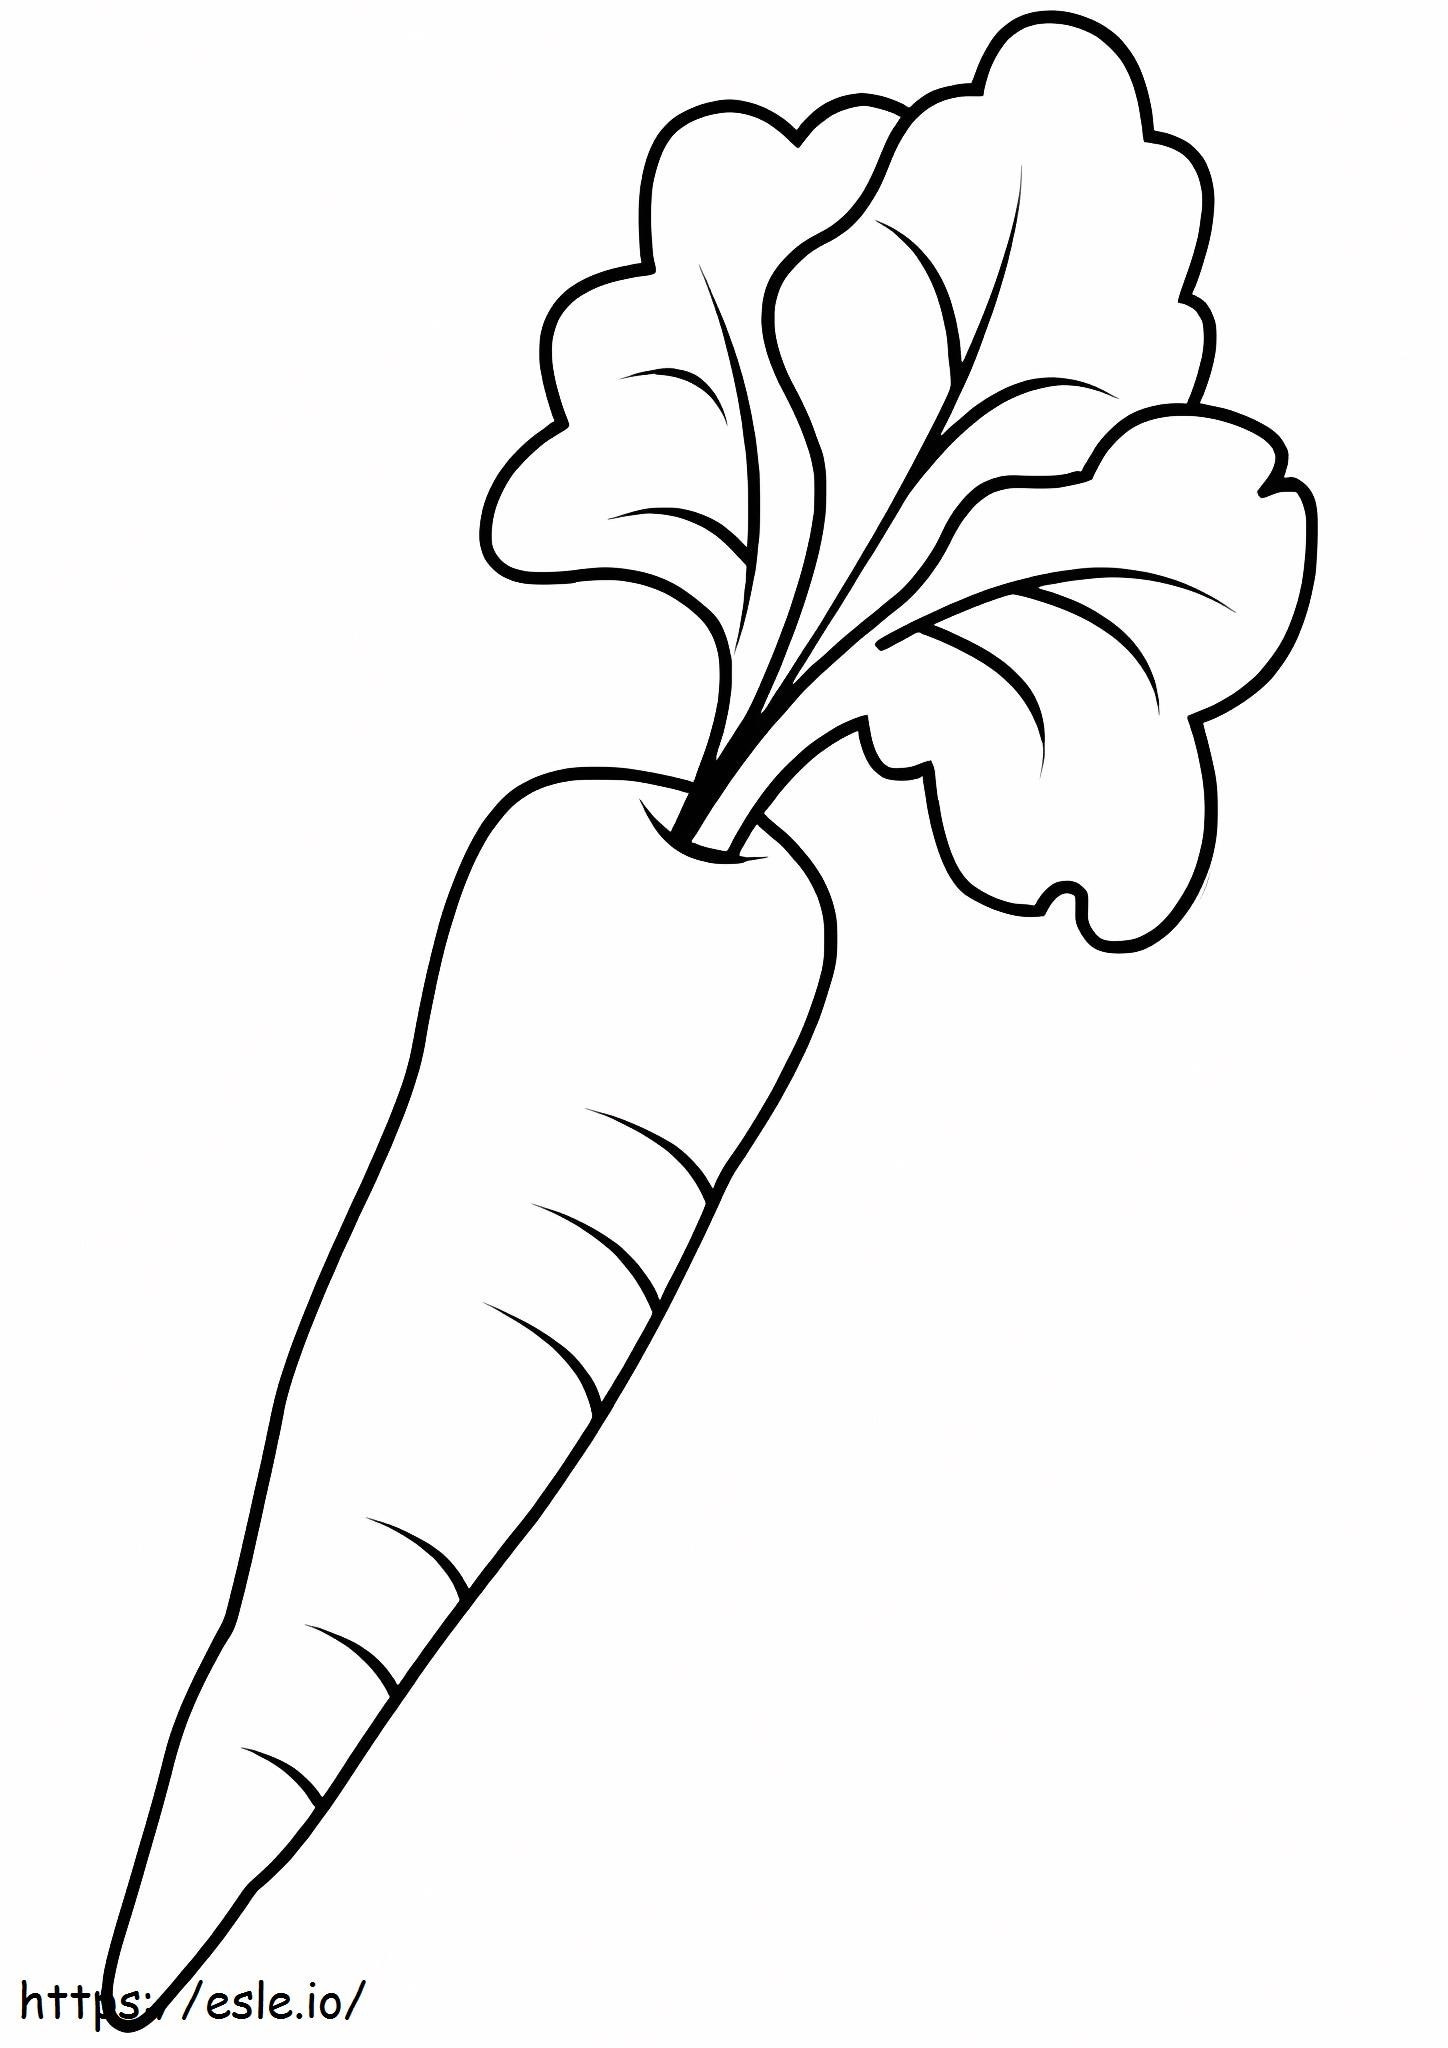 Good Carrot coloring page